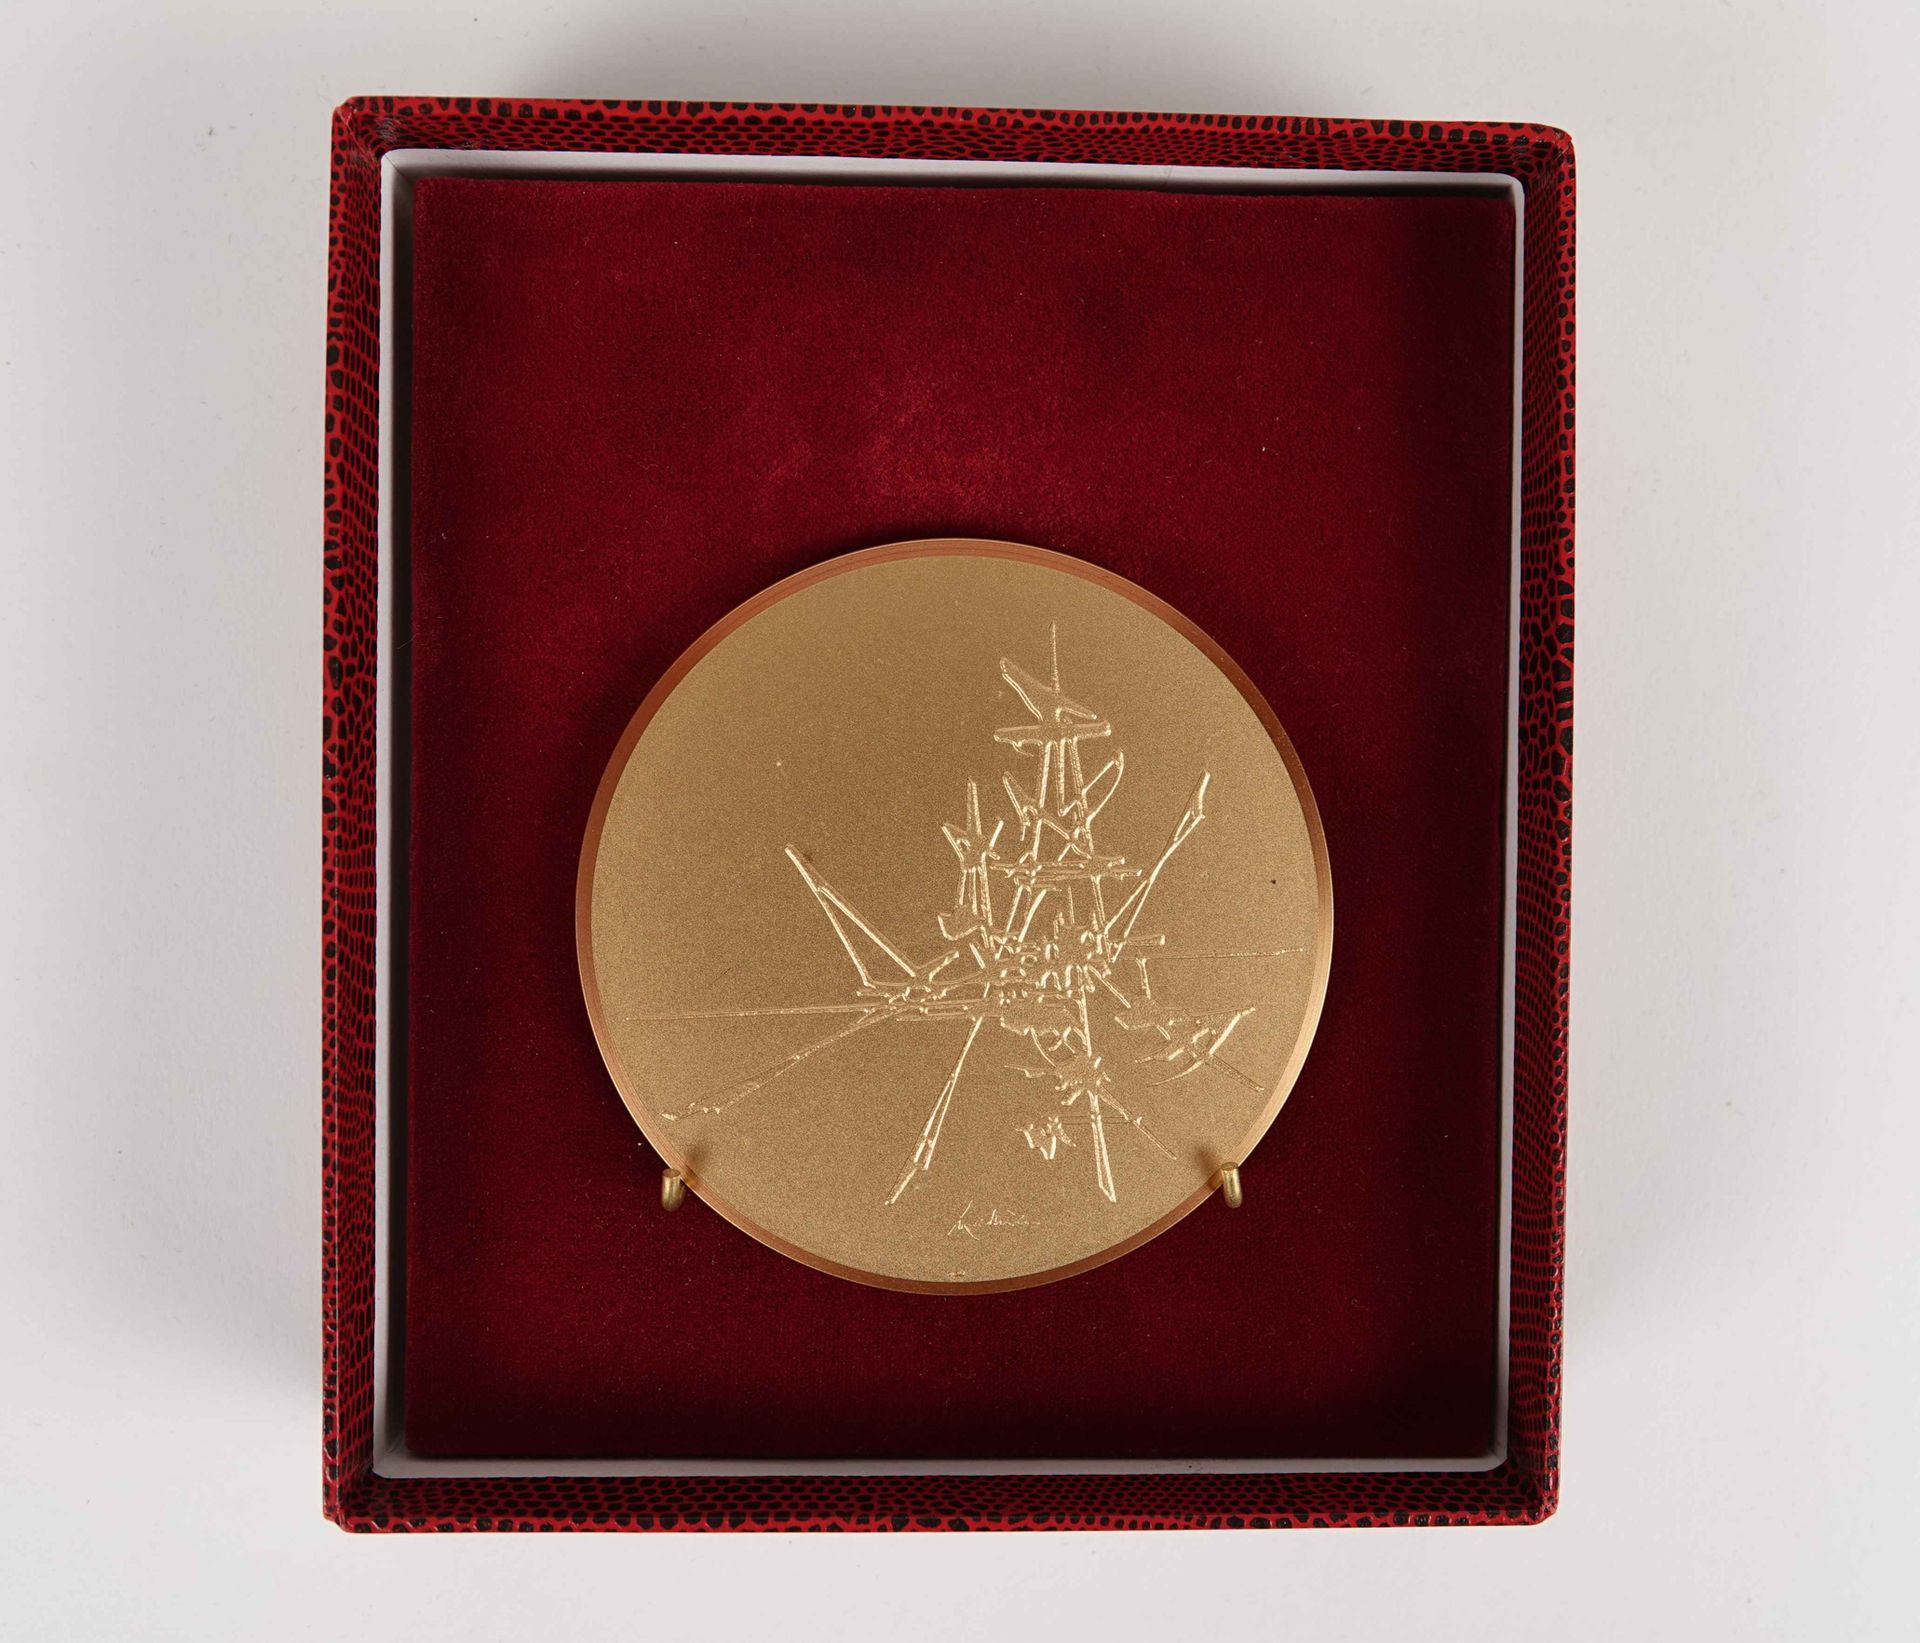 Null Georges Mathieu (1921-2012)

Gilt bronze medal, Aquitaine Antar, signed and&hellip;